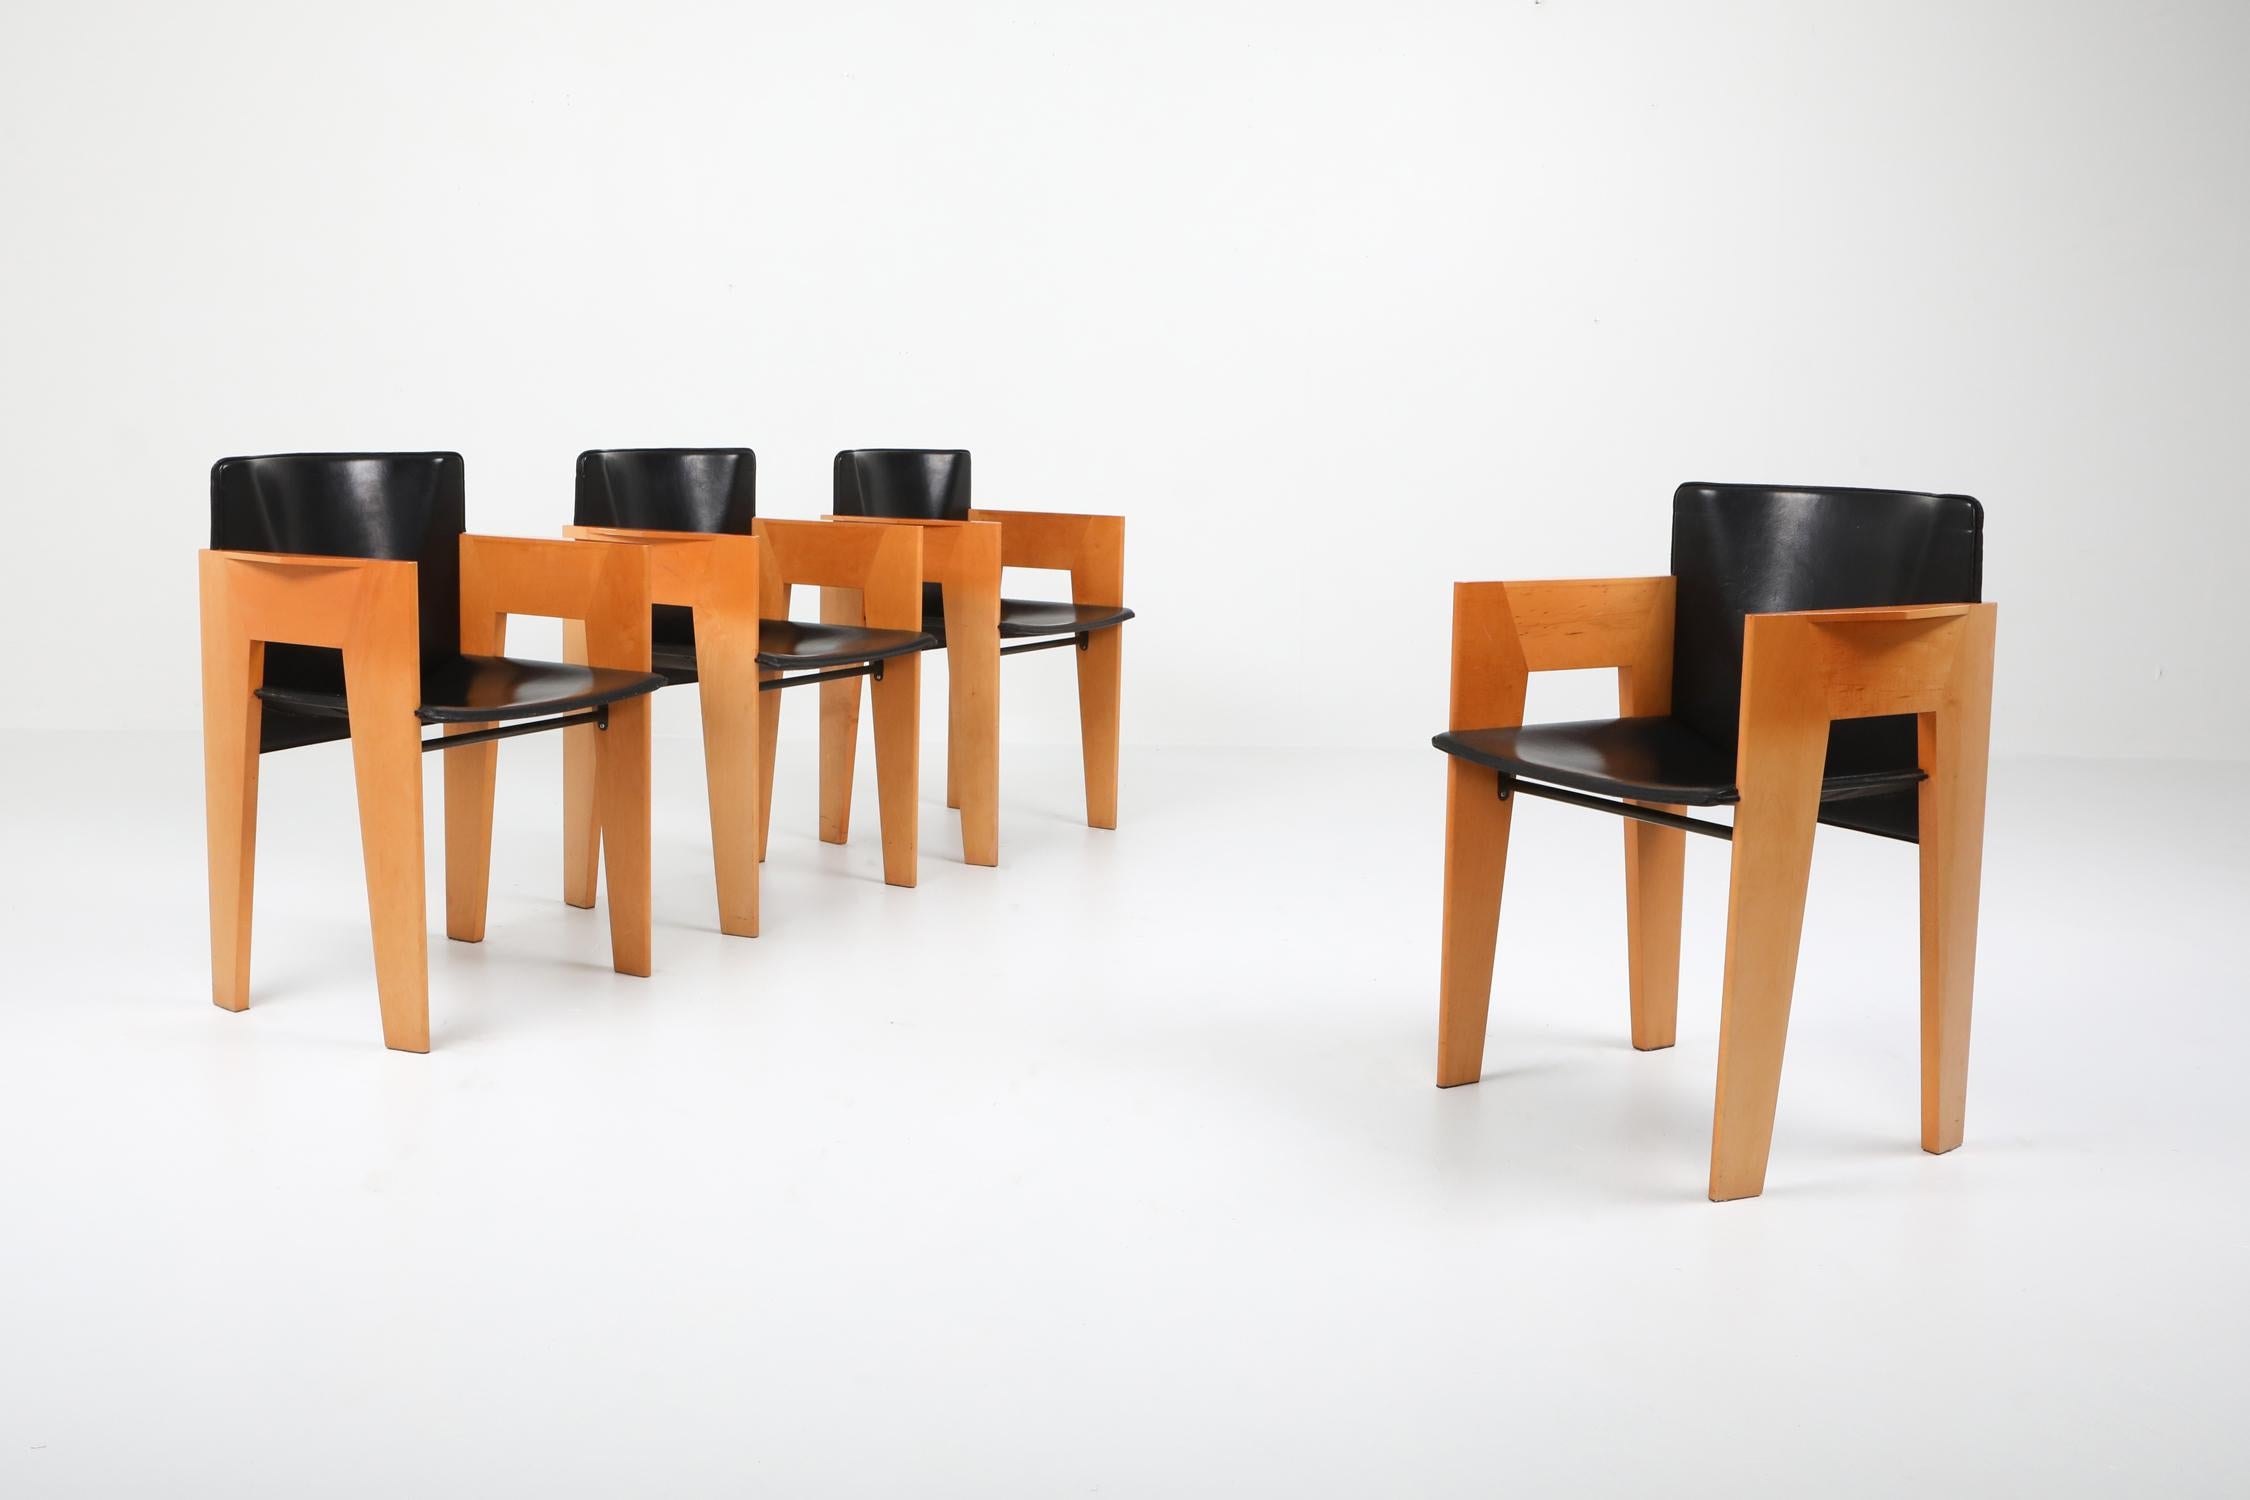 Postmodern chairs by Arco, the Netherlands, ebonized oak and saddle leather chairs, the 1980s.
Unusual armchair designed by a Dutch architect. Sculptural and elegant appearance mixed with quality materials makes these a great design. We have 4